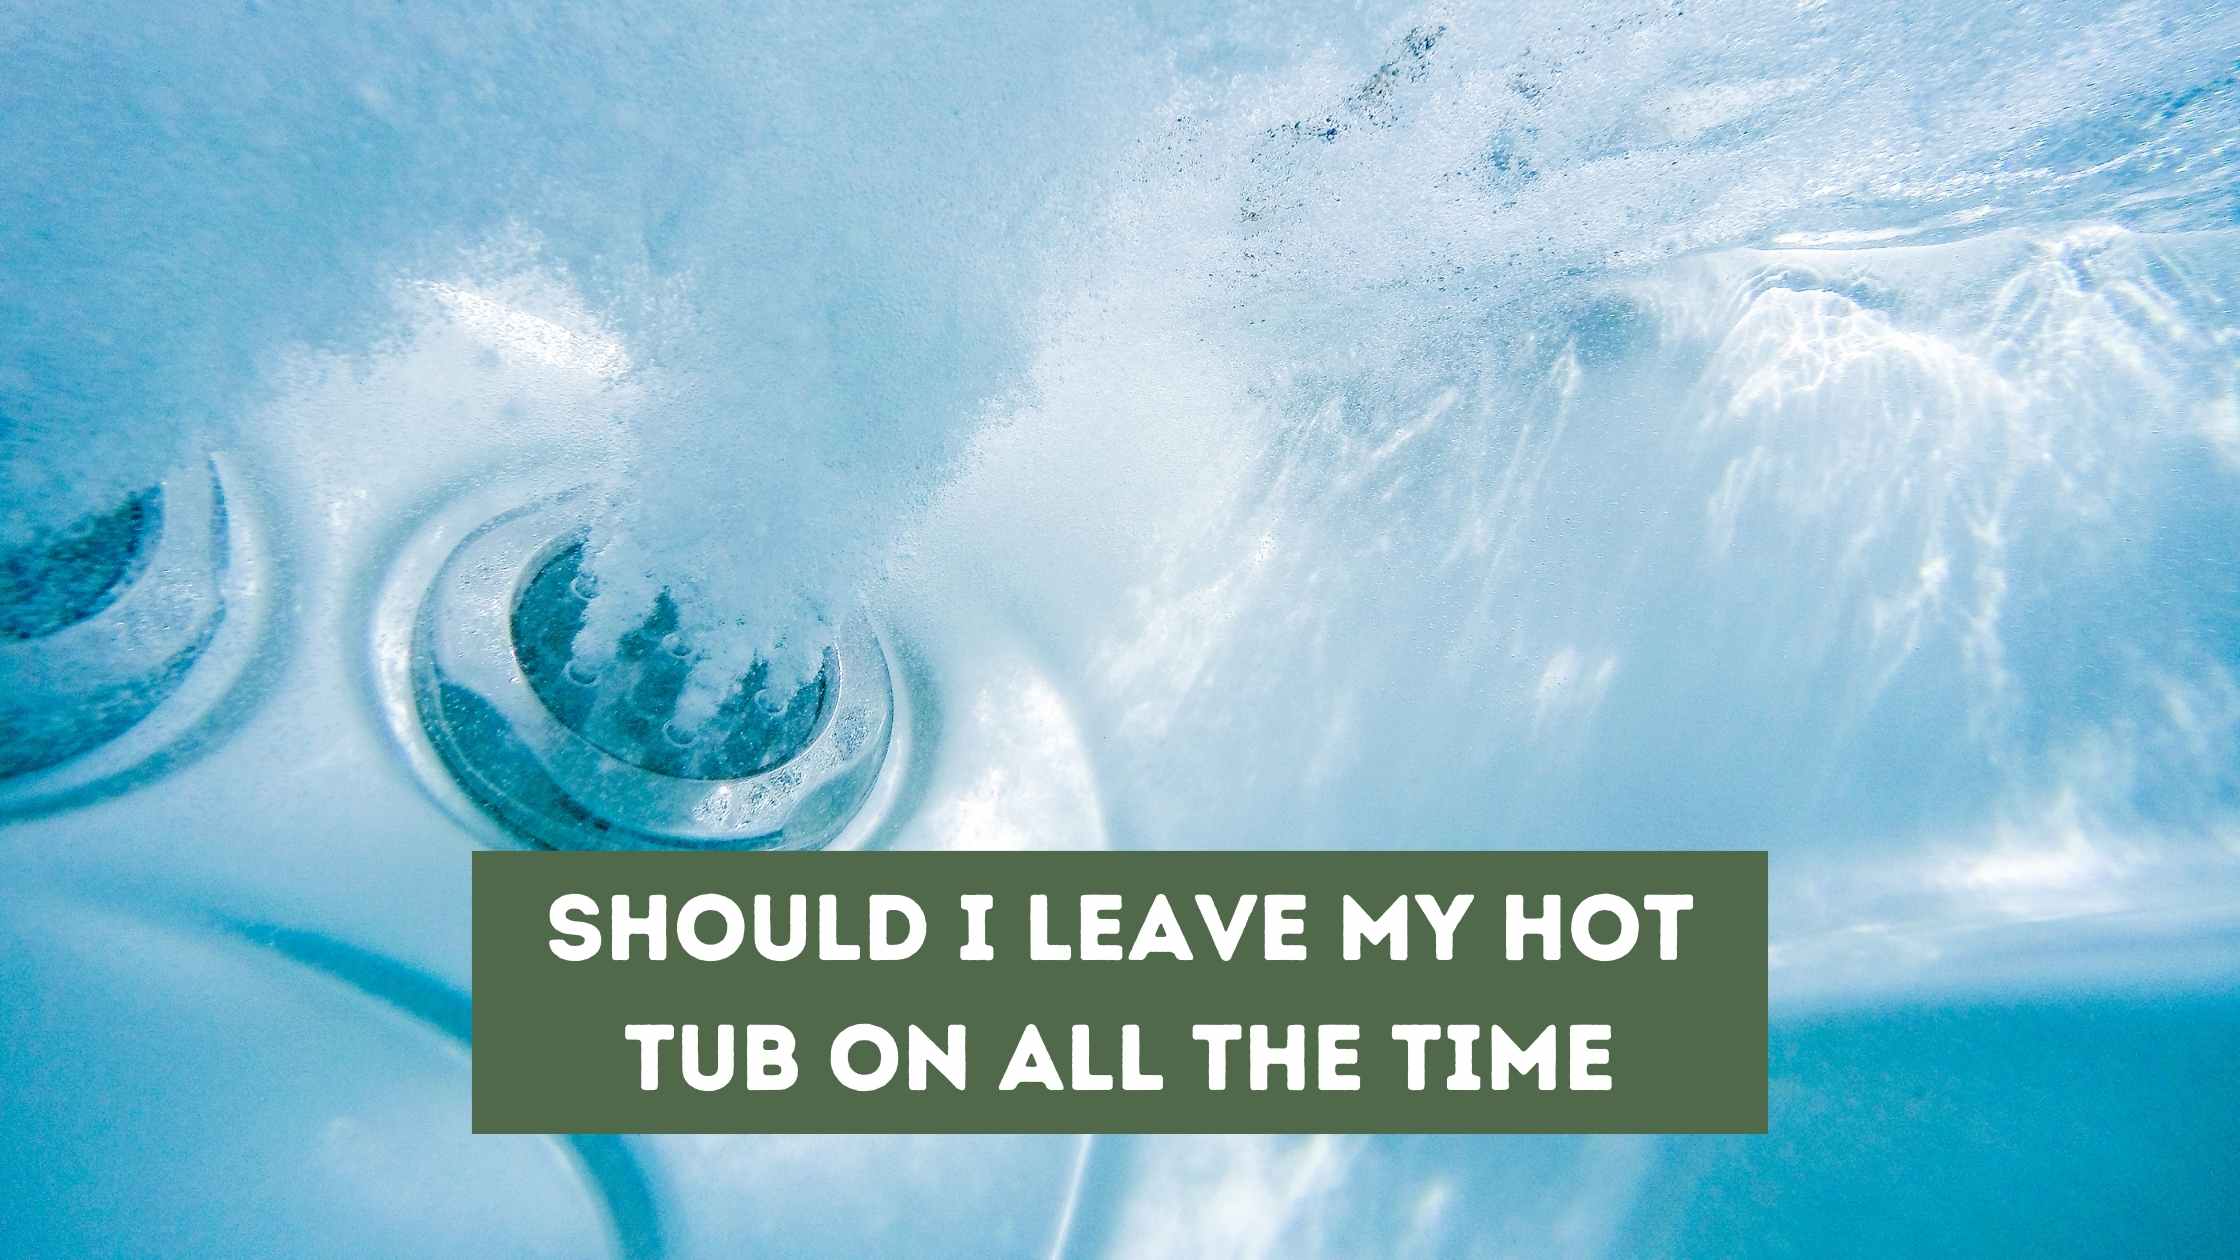 Should I Leave My Hot Tub On All the Time